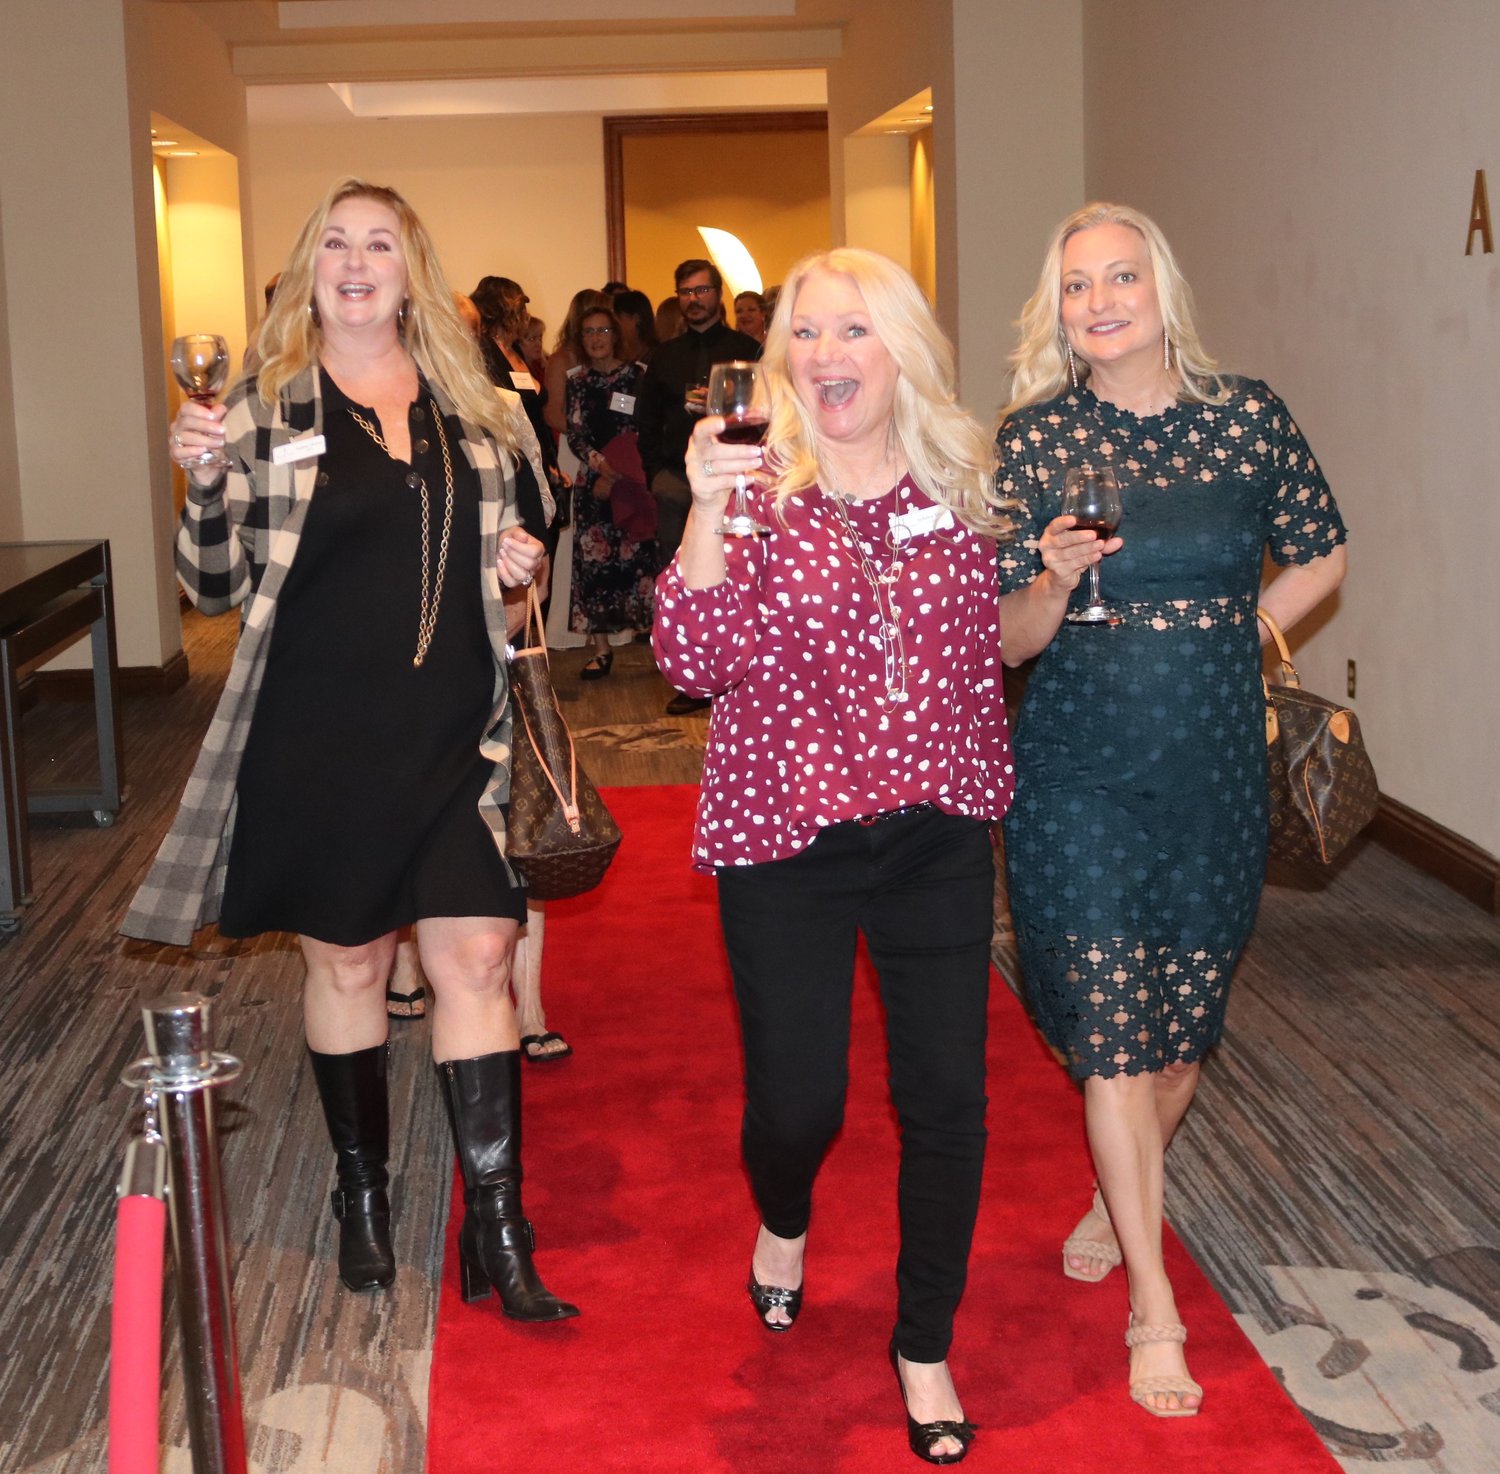 Attendees followed a red carpet to the dining room.